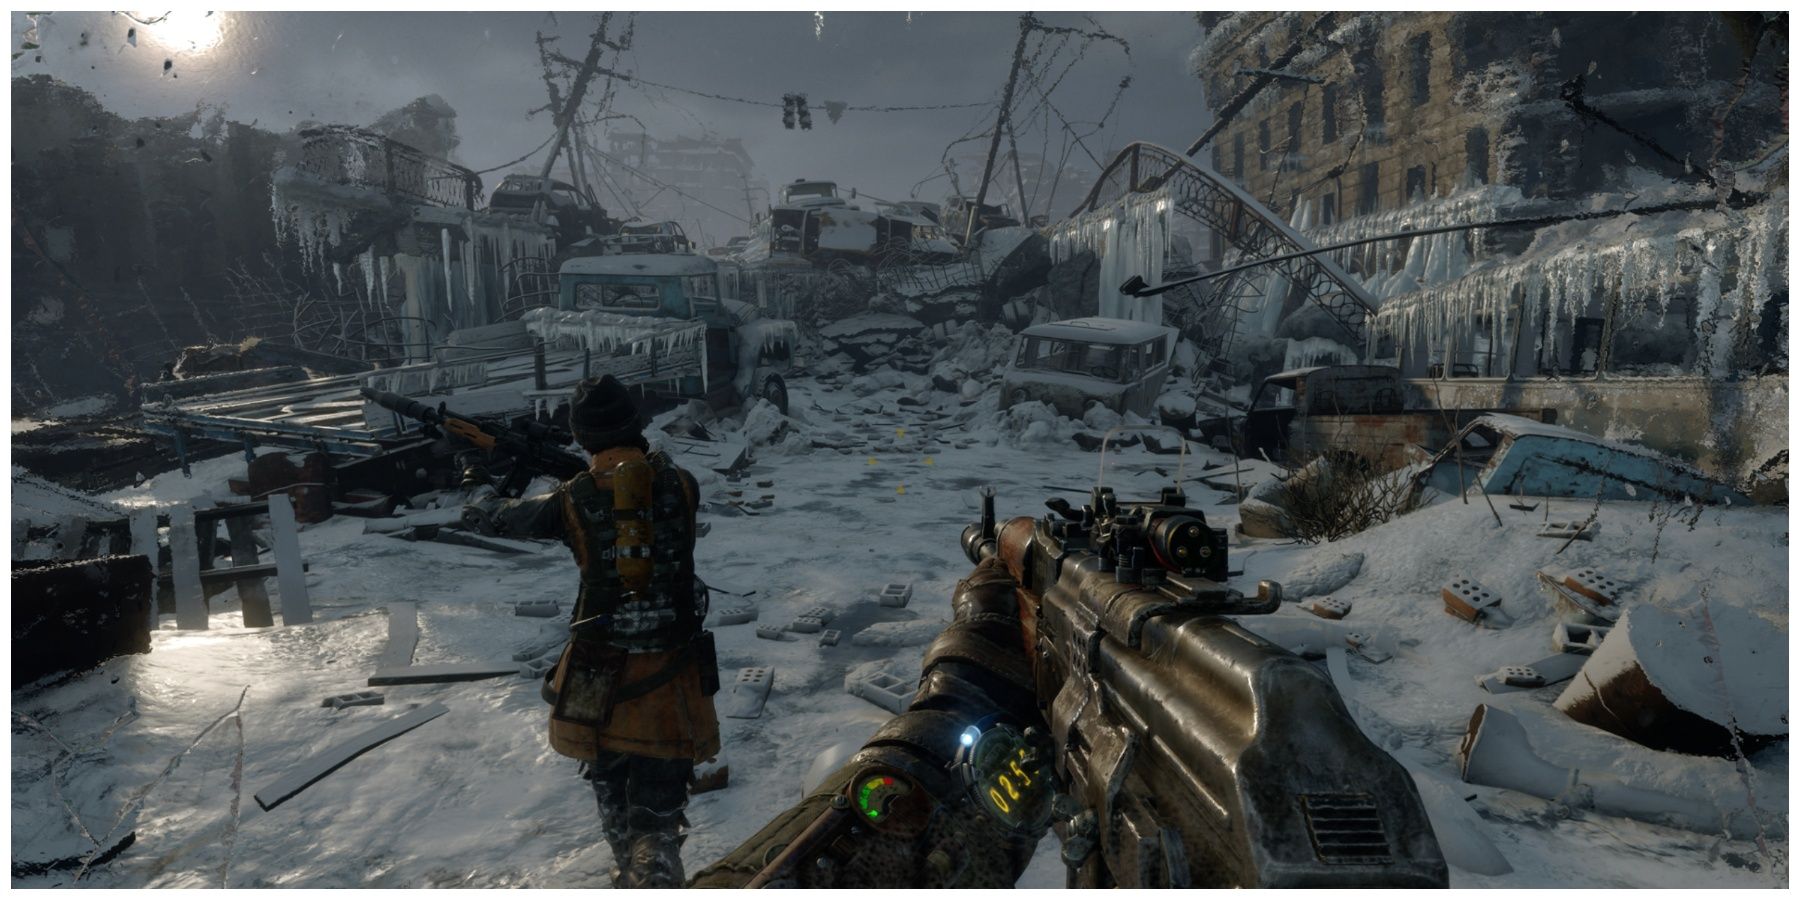 Player following a woman down an icy and dilapidated city street in Metro Exodus